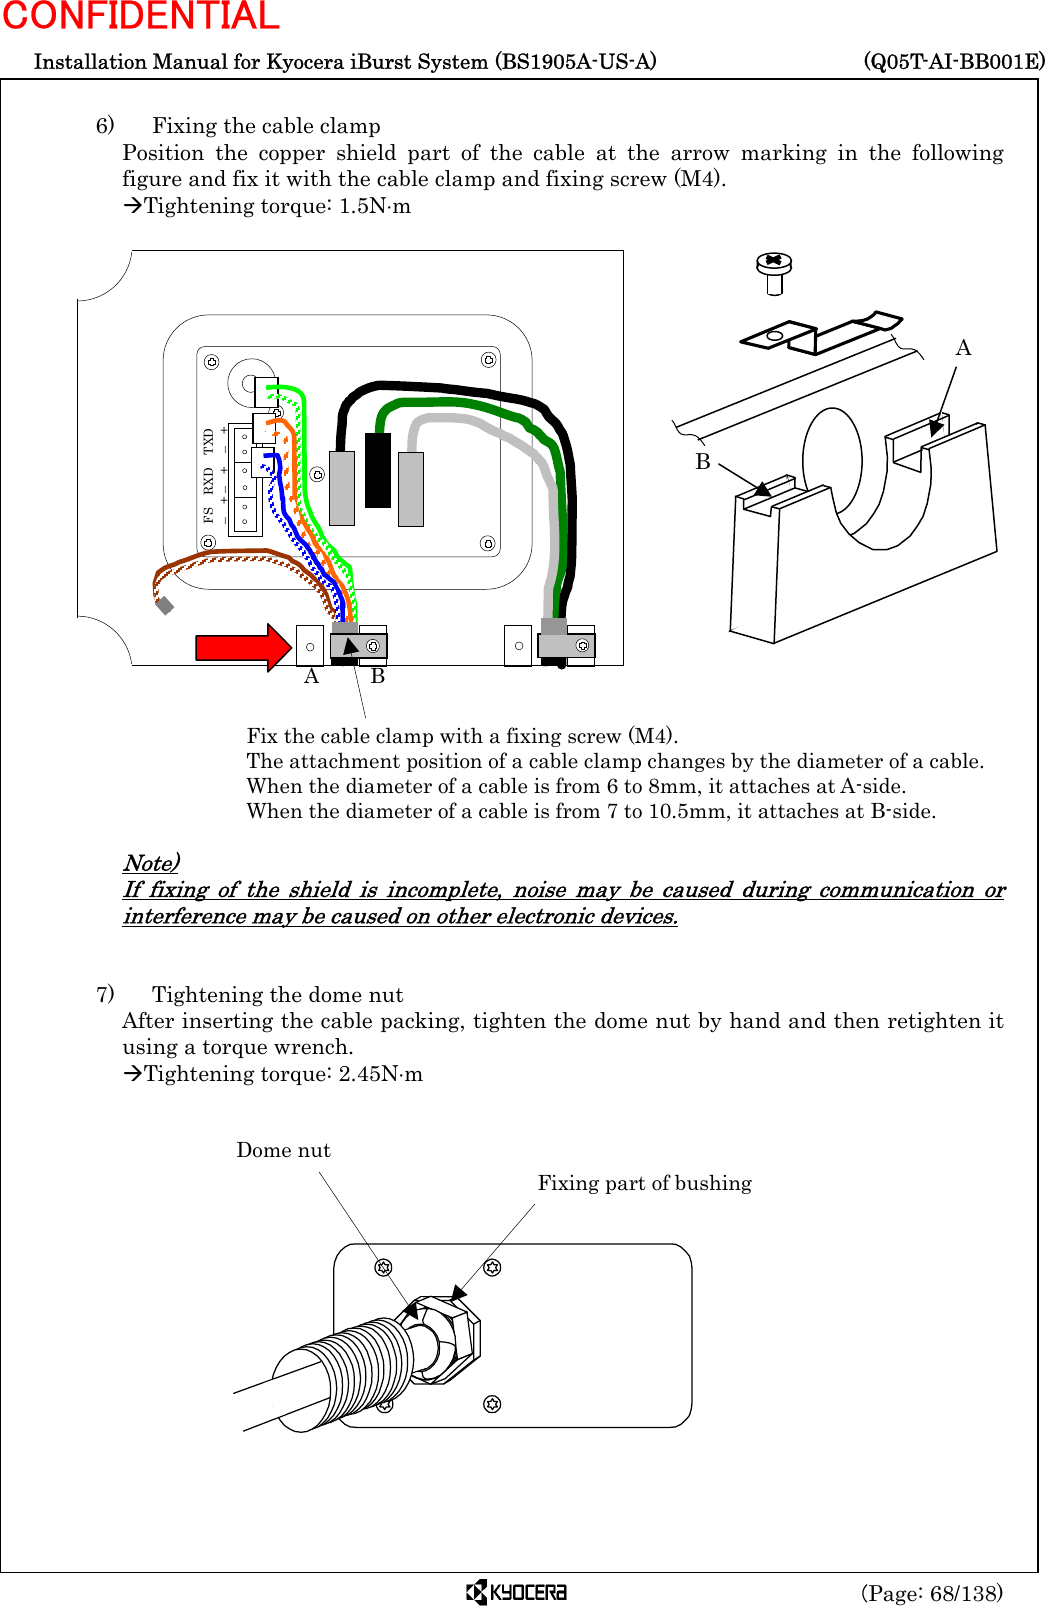  Installation Manual for Kyocera iBurst System (BS1905A-US-A)     (Q05T-AI-BB001E) (Page: 68/138) CONFIDENTIAL  6)    Fixing the cable clamp Position the copper shield part of the cable at the arrow marking in the following figure and fix it with the cable clamp and fixing screw (M4). ÆTightening torque: 1.5N⋅m                         Note) If fixing of the shield is incomplete, noise may be caused during communication or interference may be caused on other electronic devices.   7)    Tightening the dome nut After inserting the cable packing, tighten the dome nut by hand and then retighten it using a torque wrench.  ÆTightening torque: 2.45N⋅m                Dome nut Fixing part of bushing Fix the cable clamp with a fixing screw (M4). The attachment position of a cable clamp changes by the diameter of a cable. When the diameter of a cable is from 6 to 8mm, it attaches at A-side. When the diameter of a cable is from 7 to 10.5mm, it attaches at B-side. A     B A B FS  RXD  TXD –  + –  +  –  + 